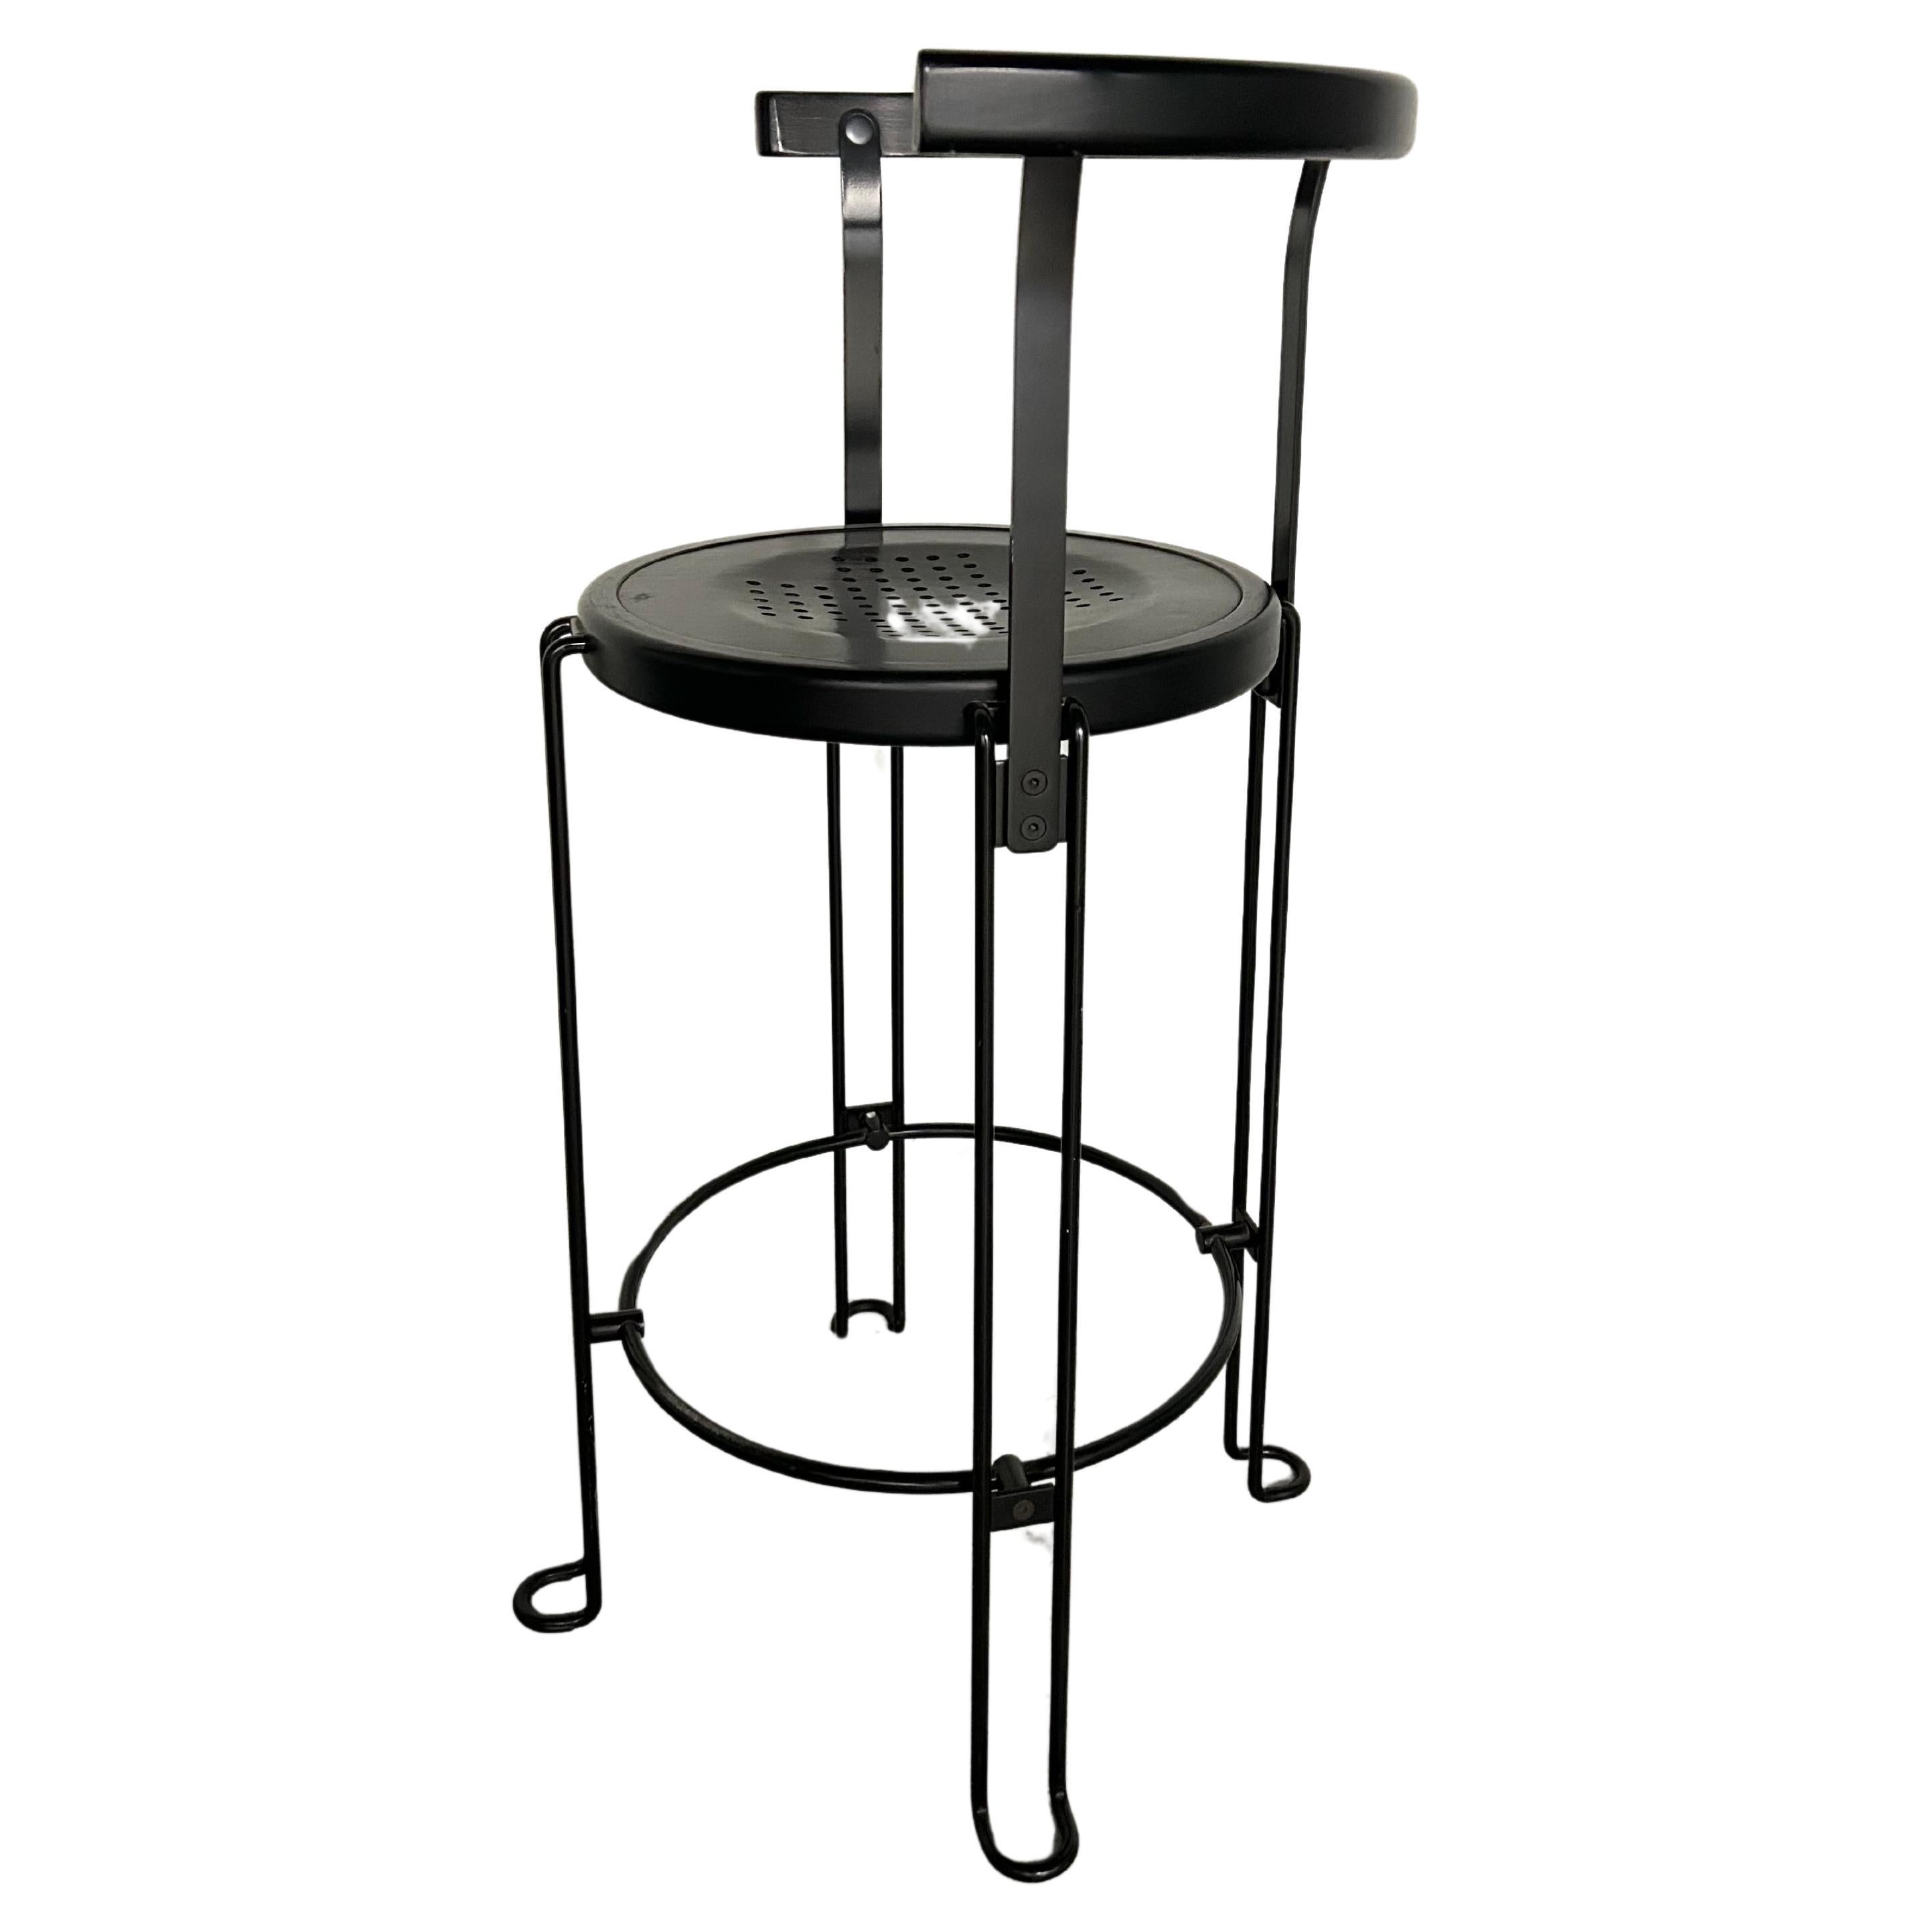 Borge Lindau for Bla Station Sweden, 1986 B4-65 Counter Height Stool